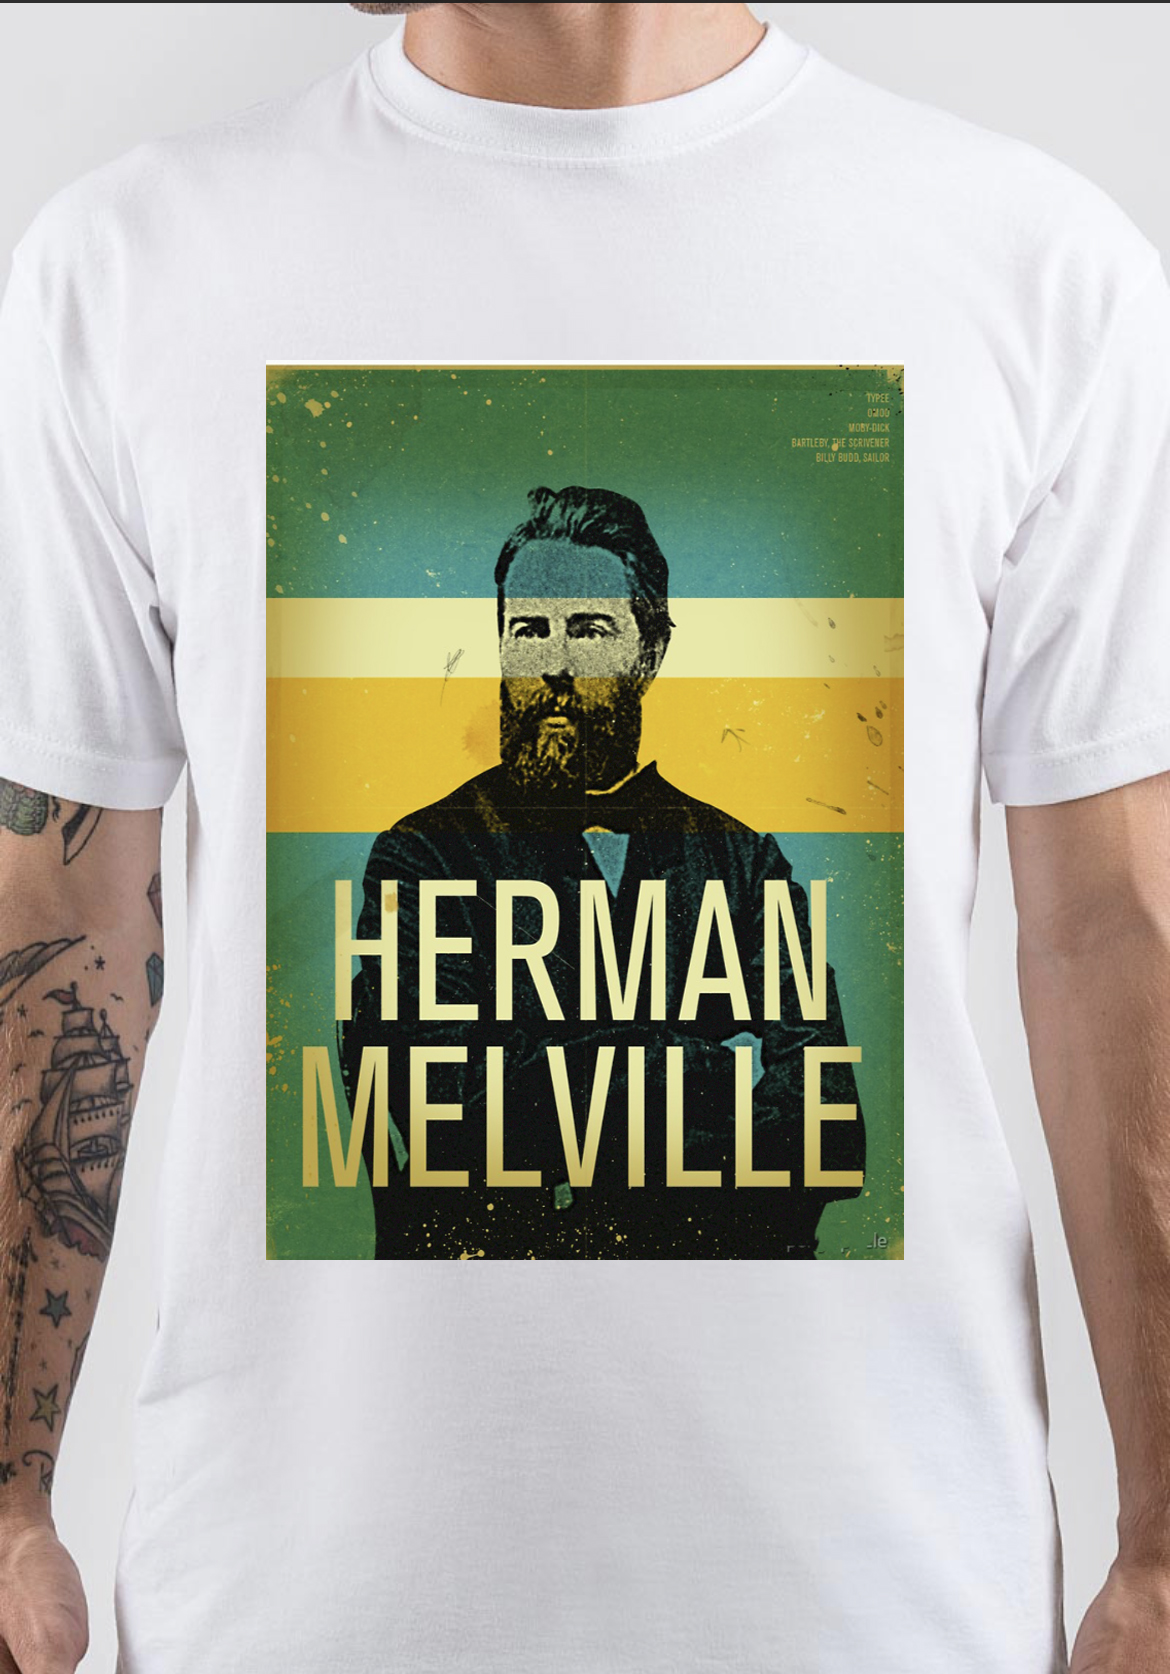 Herman Melville T-Shirt And Merchandise